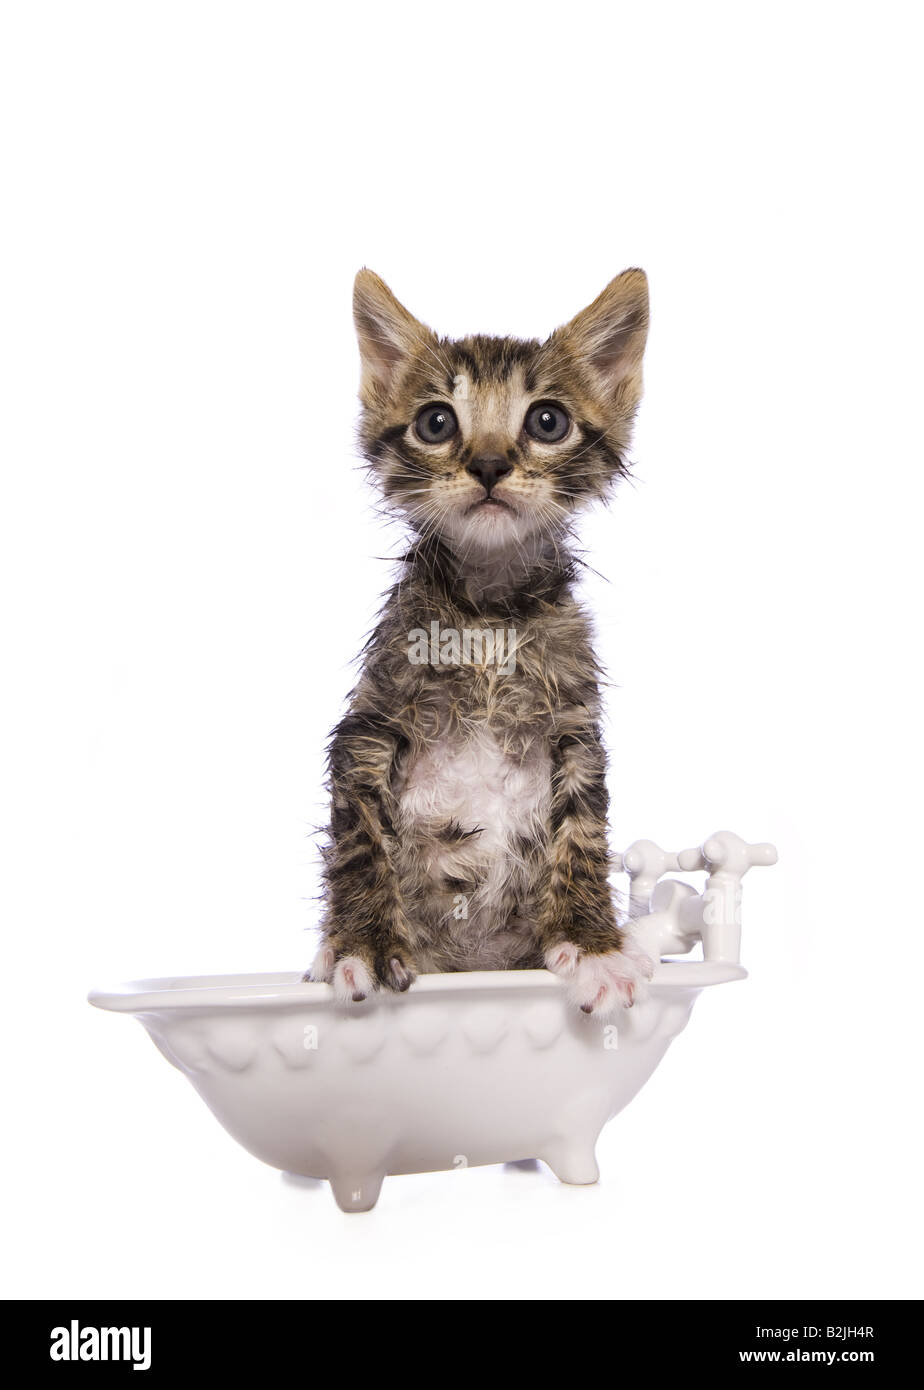 Wet cat after taking a bath in small white bathtub isolated on white background Stock Photo